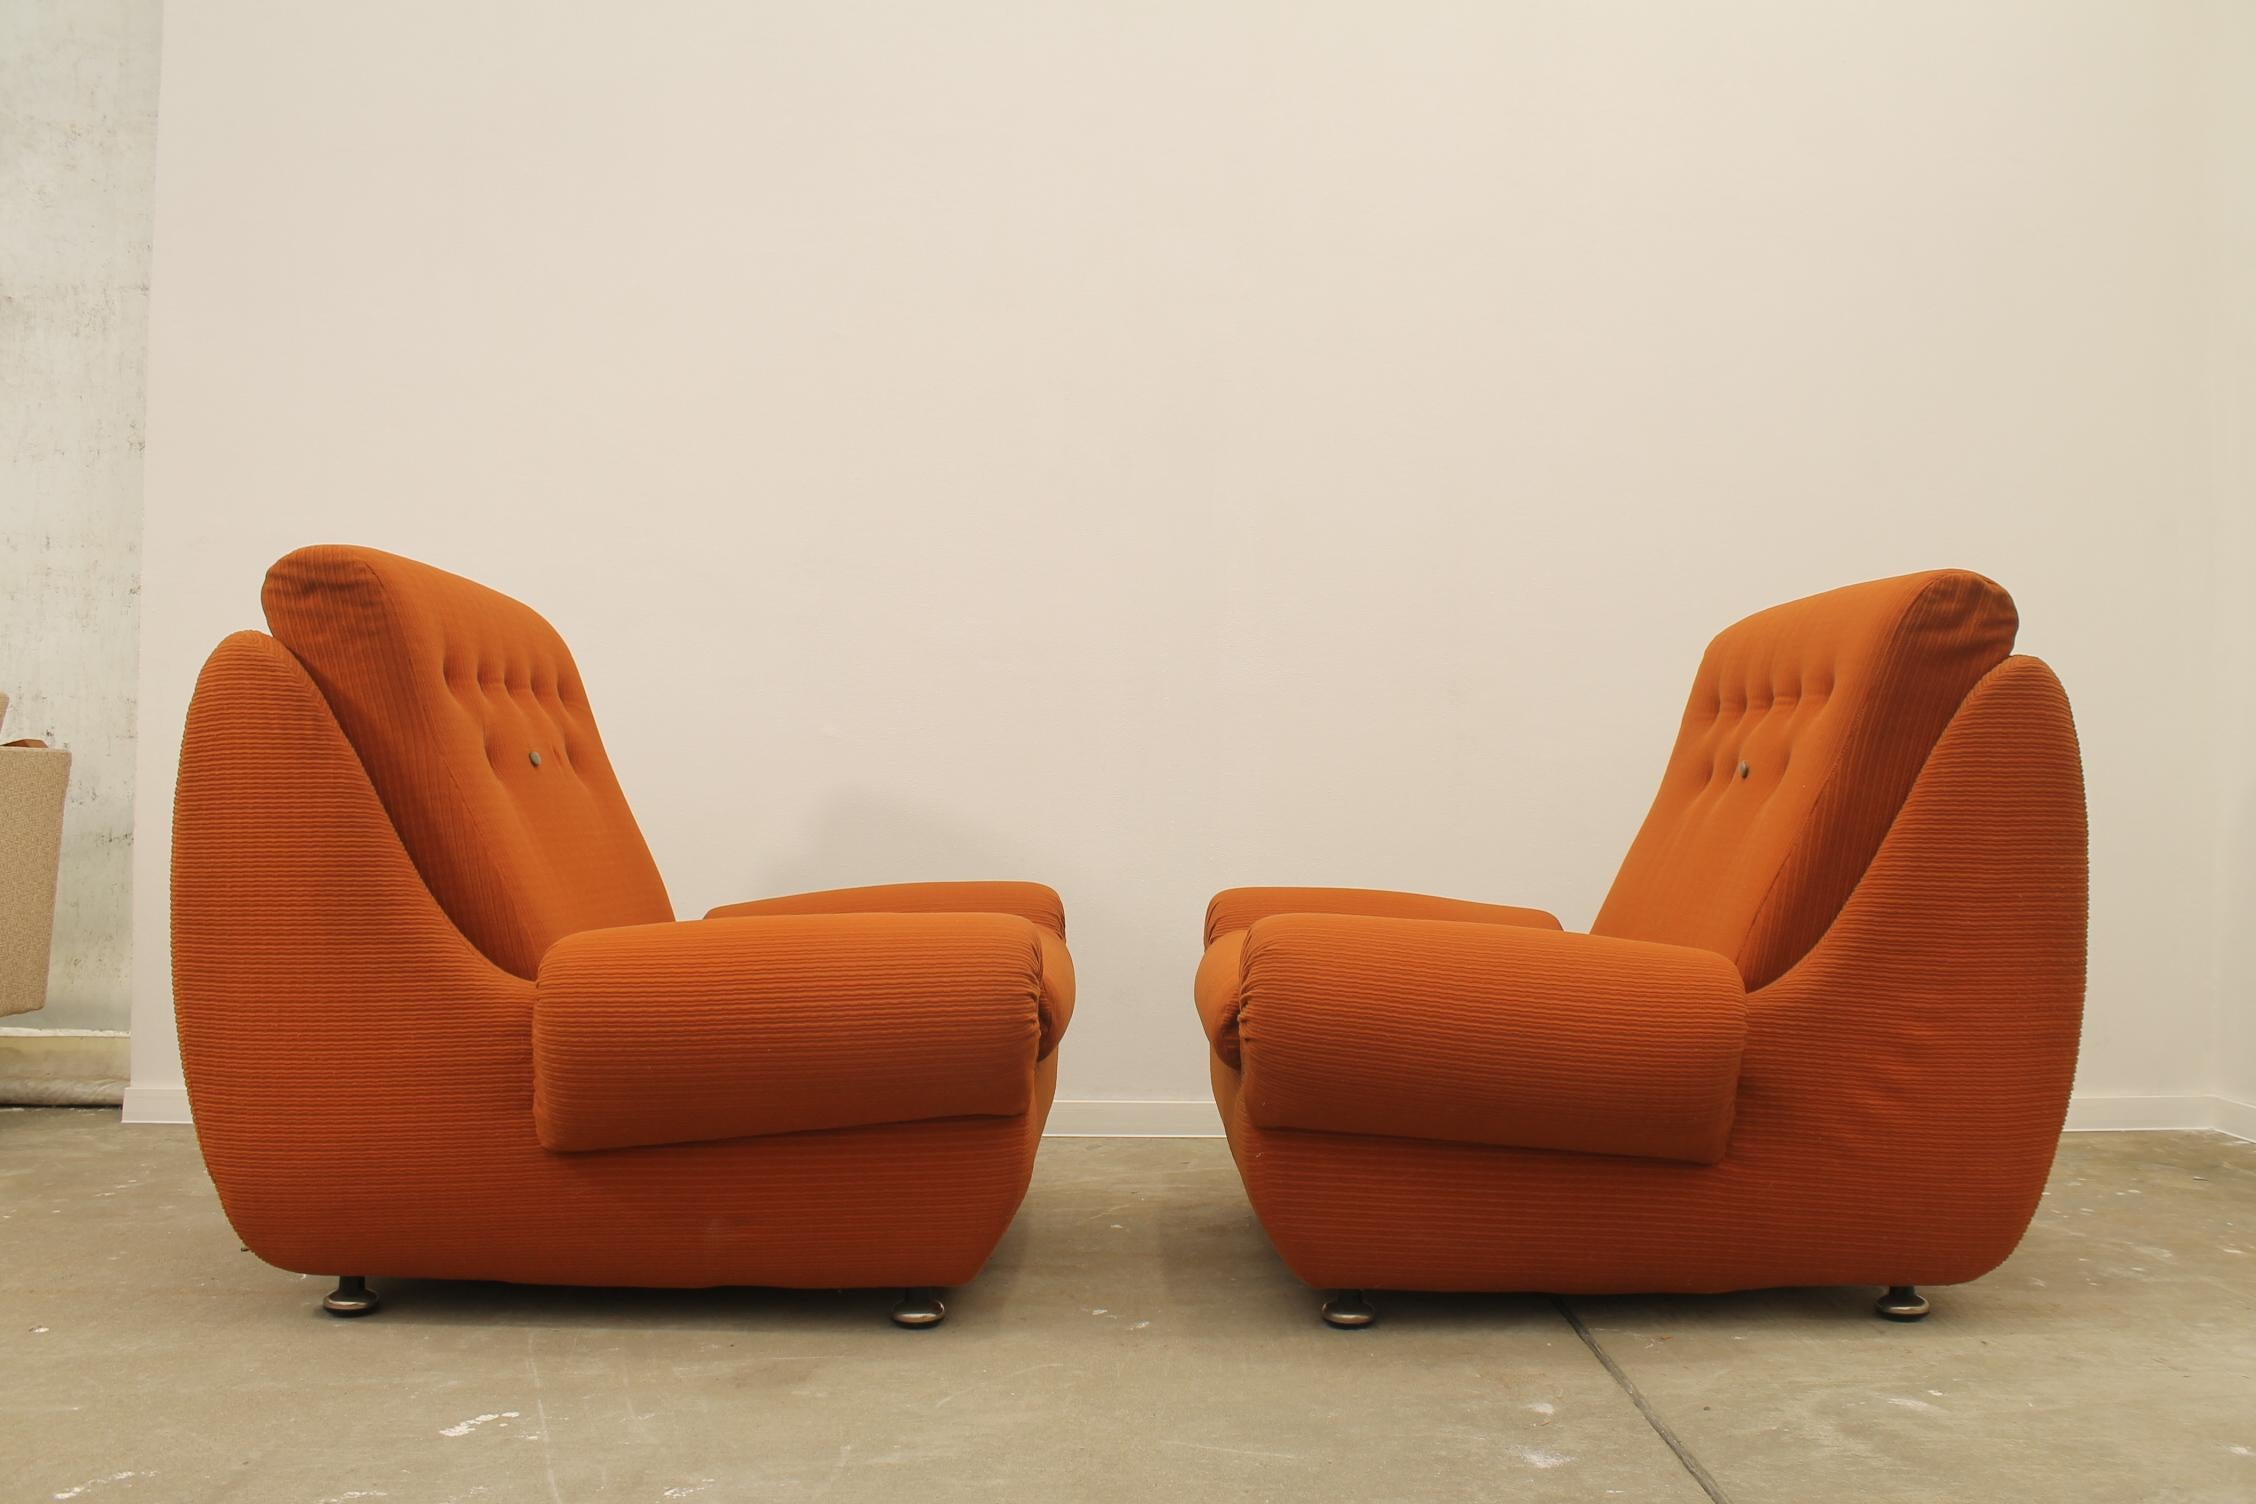 Late 20th Century Eastern Bloc Vintage armchairs by Jitona, Czechoslovakia, 1970s For Sale